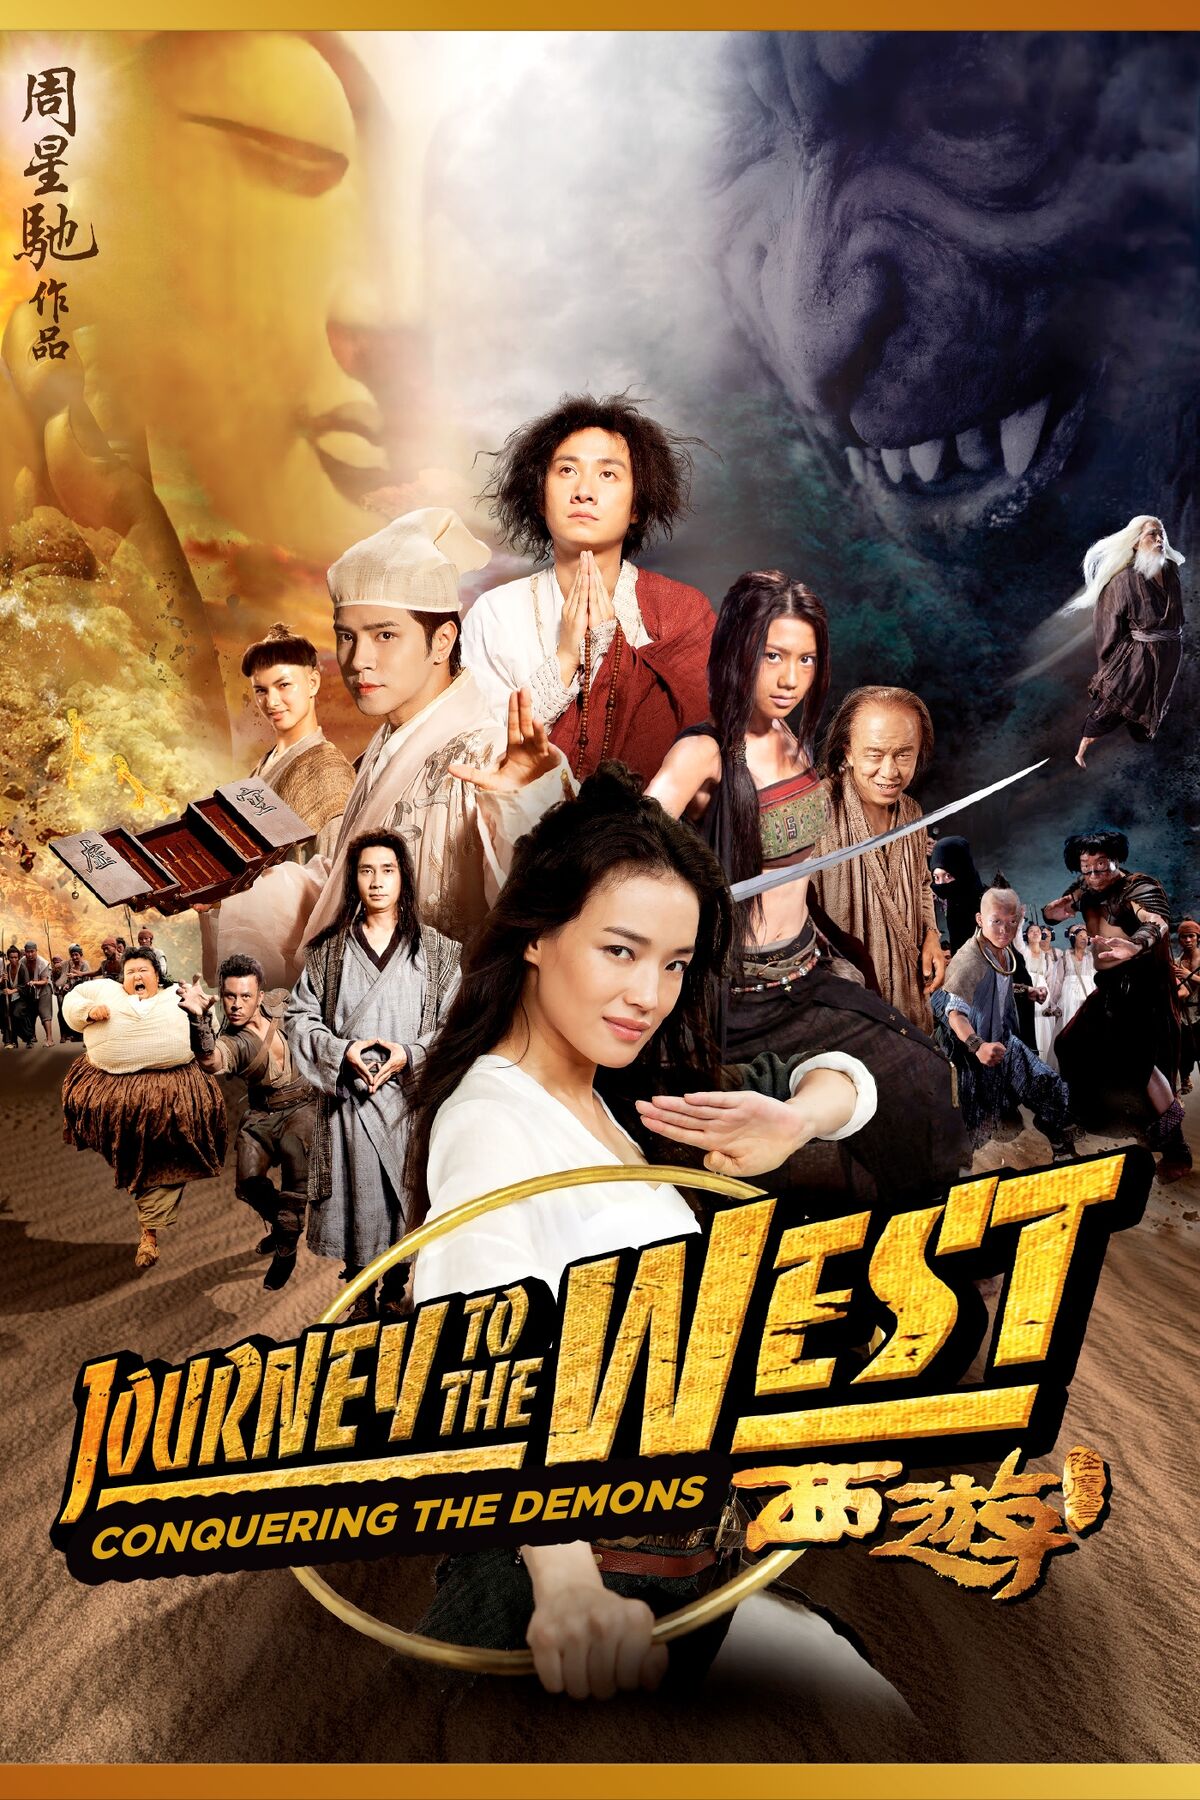 jackie chan journey to the west